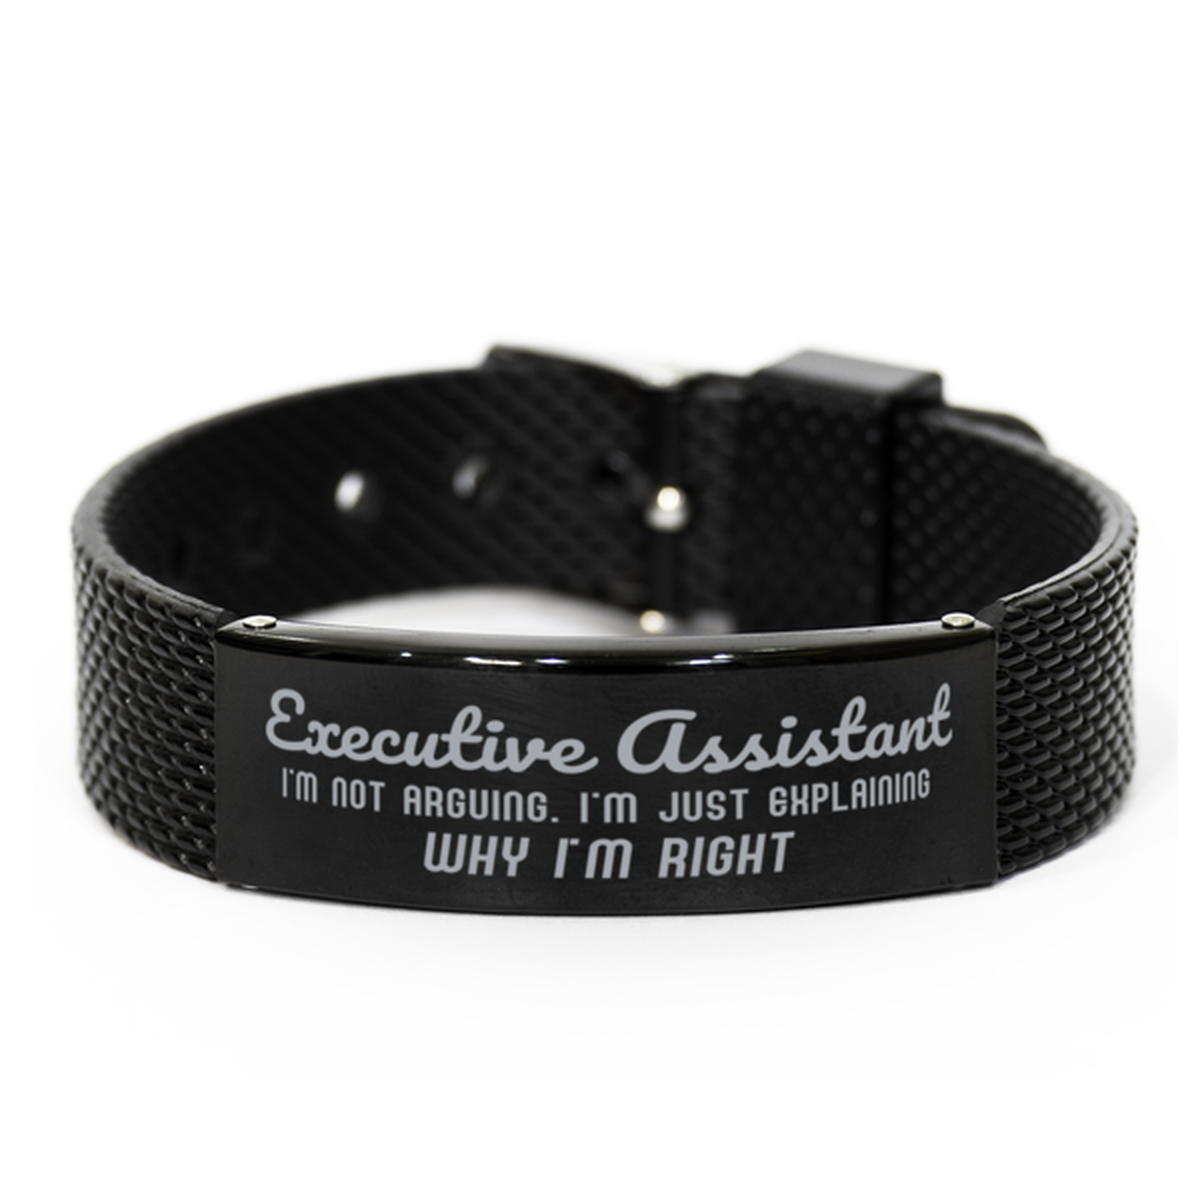 Executive Assistant I'm not Arguing. I'm Just Explaining Why I'm RIGHT Black Shark Mesh Bracelet, Funny Saying Quote Executive Assistant Gifts For Executive Assistant Graduation Birthday Christmas Gifts for Men Women Coworker